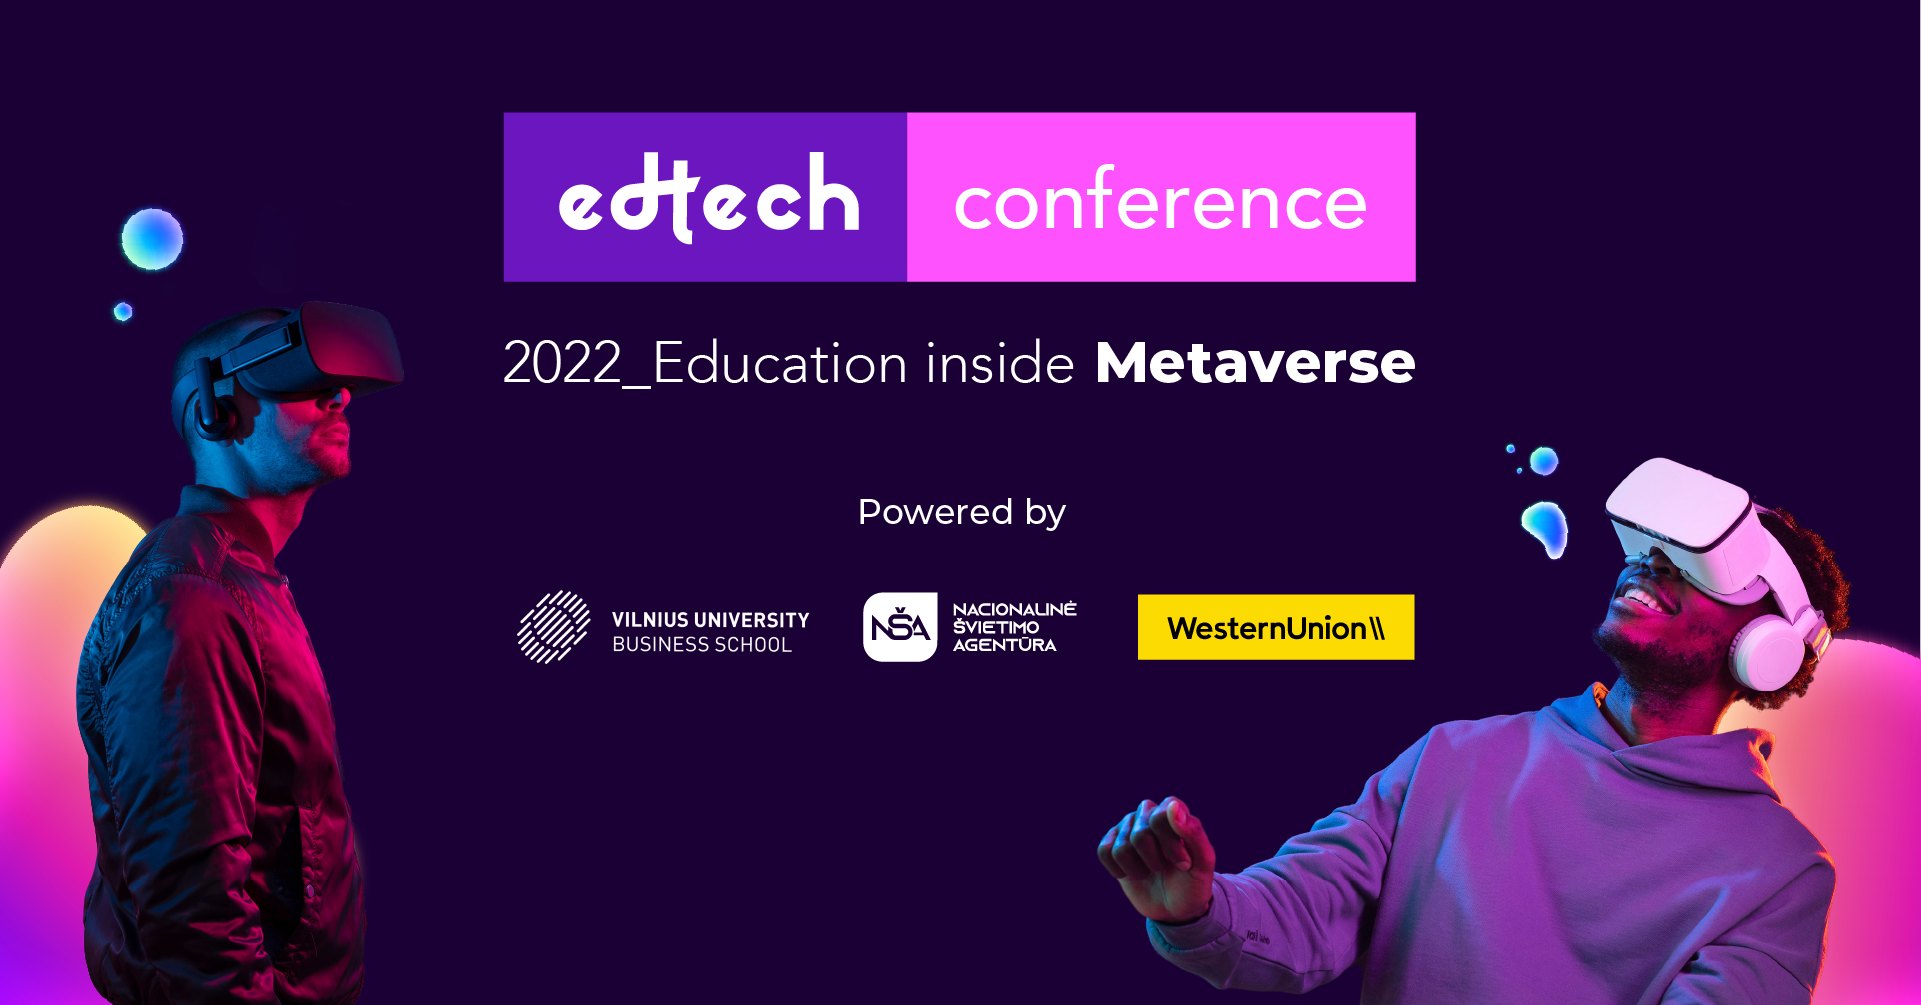 EdTech conference